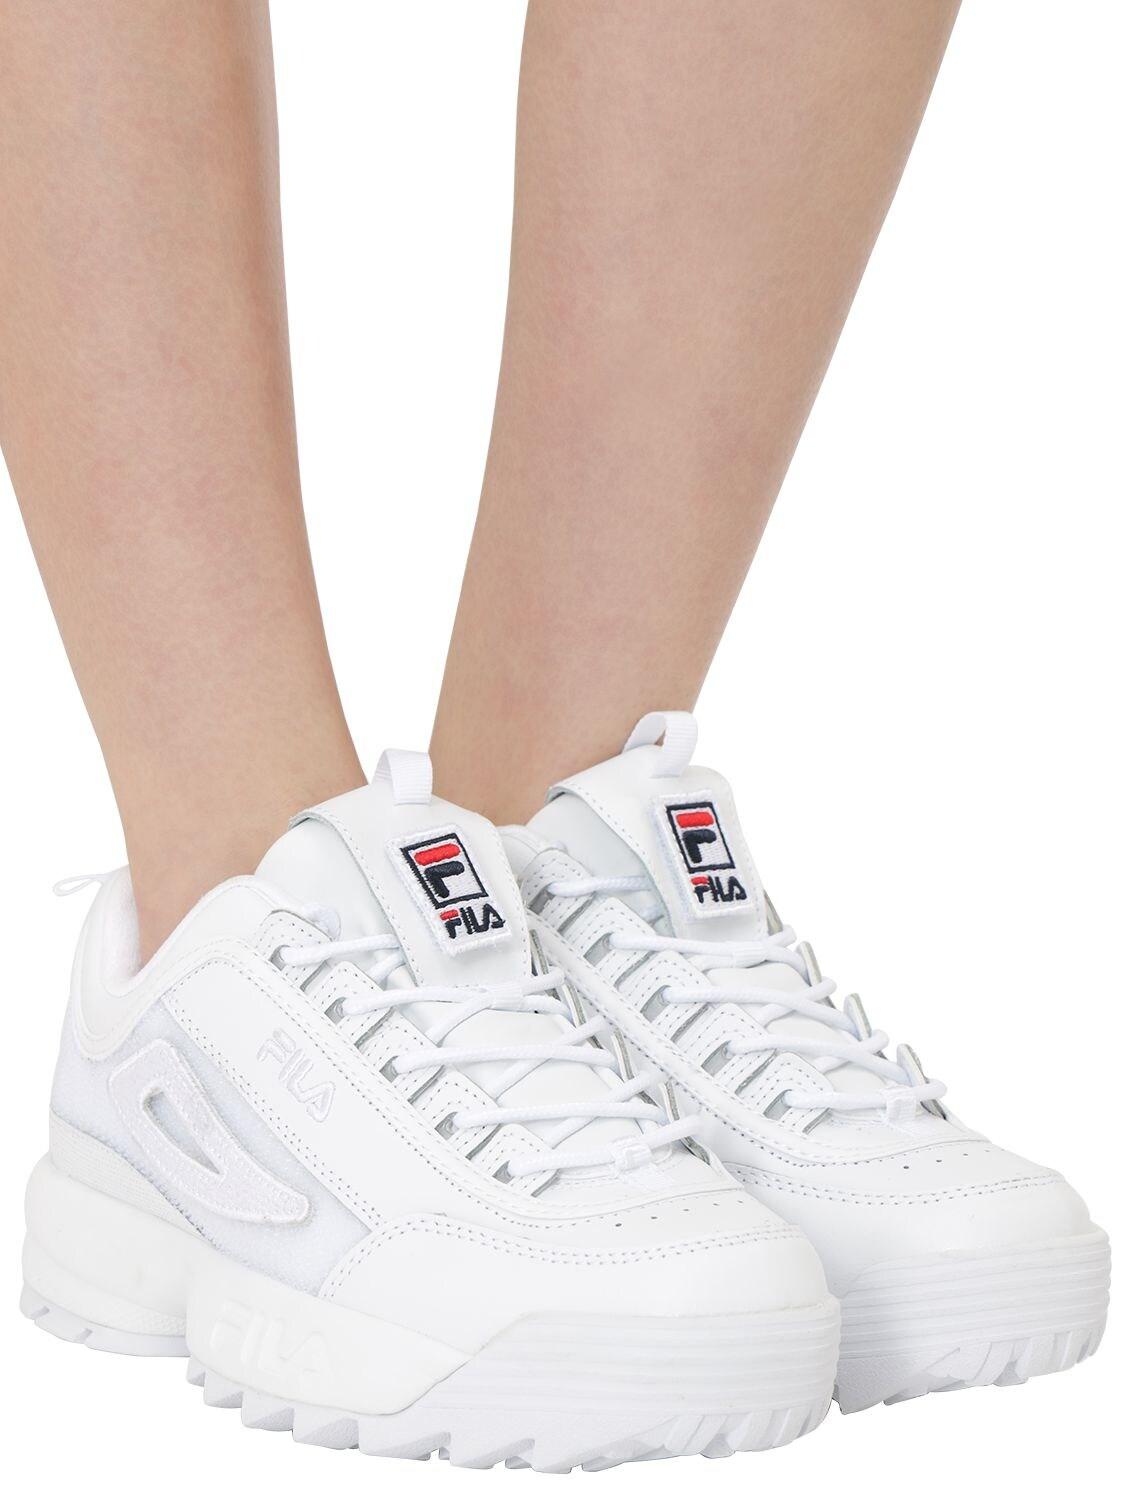 Fila Disruptor Patches Sneakers in White - Lyst